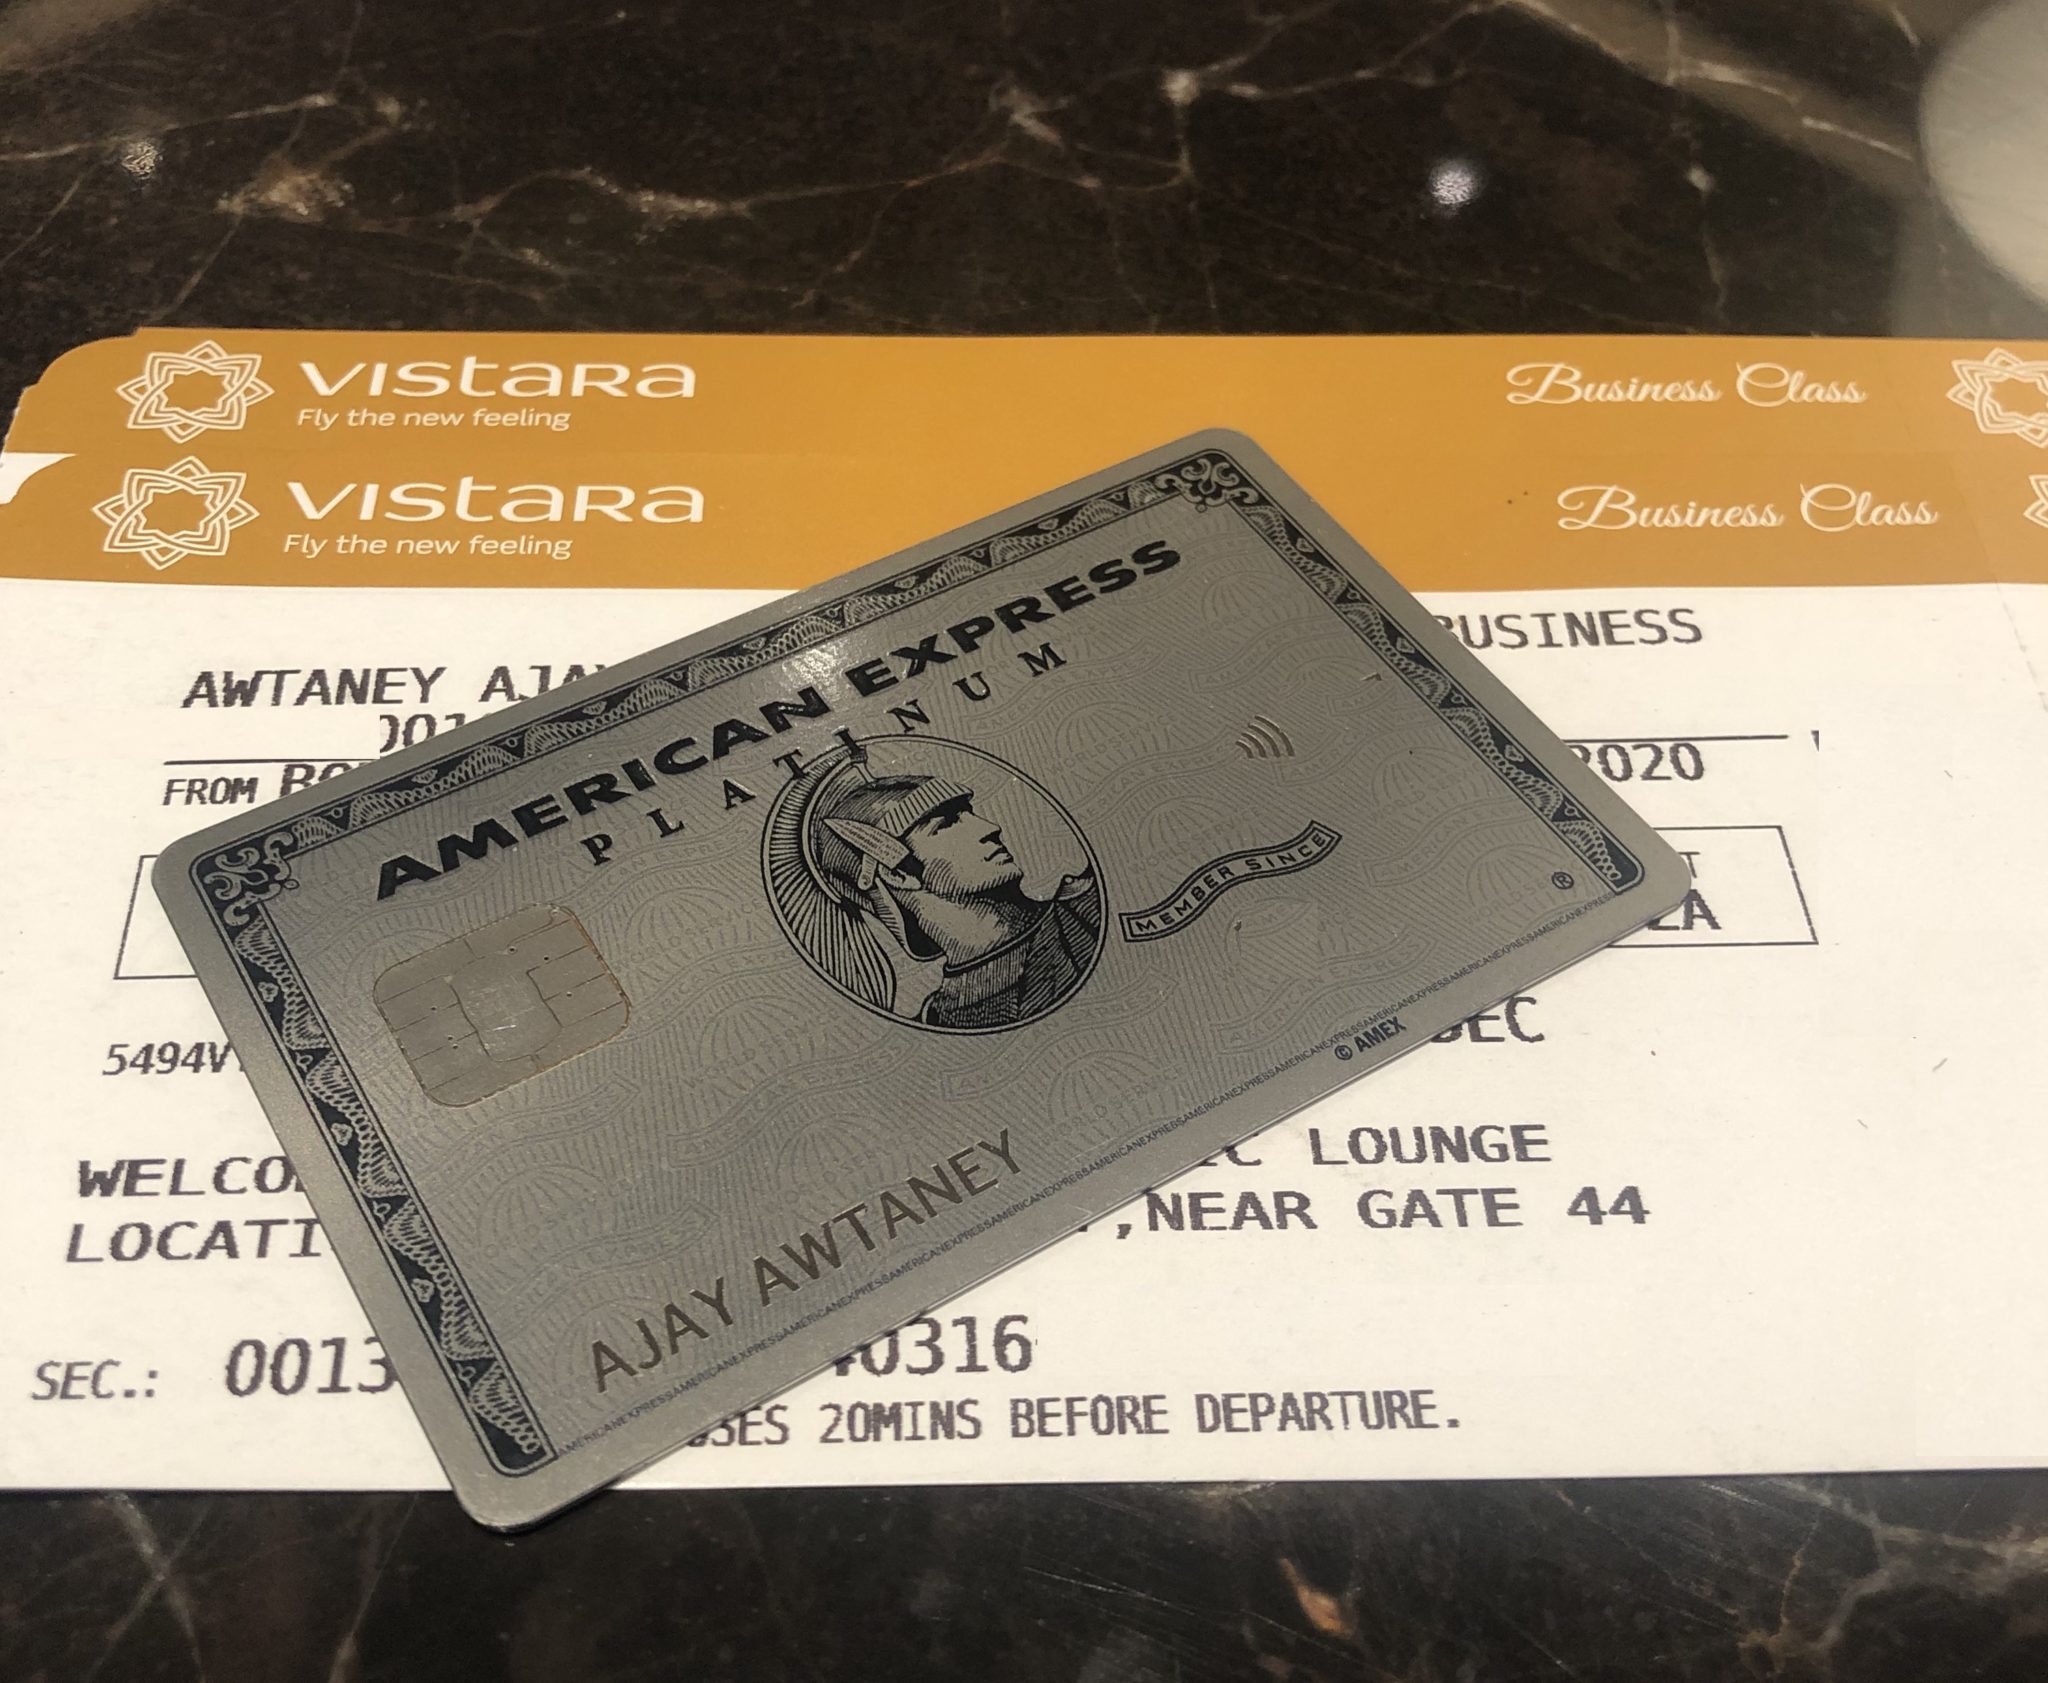 8 Great Reasons to get that American Express Platinum Card - Live from a Lounge